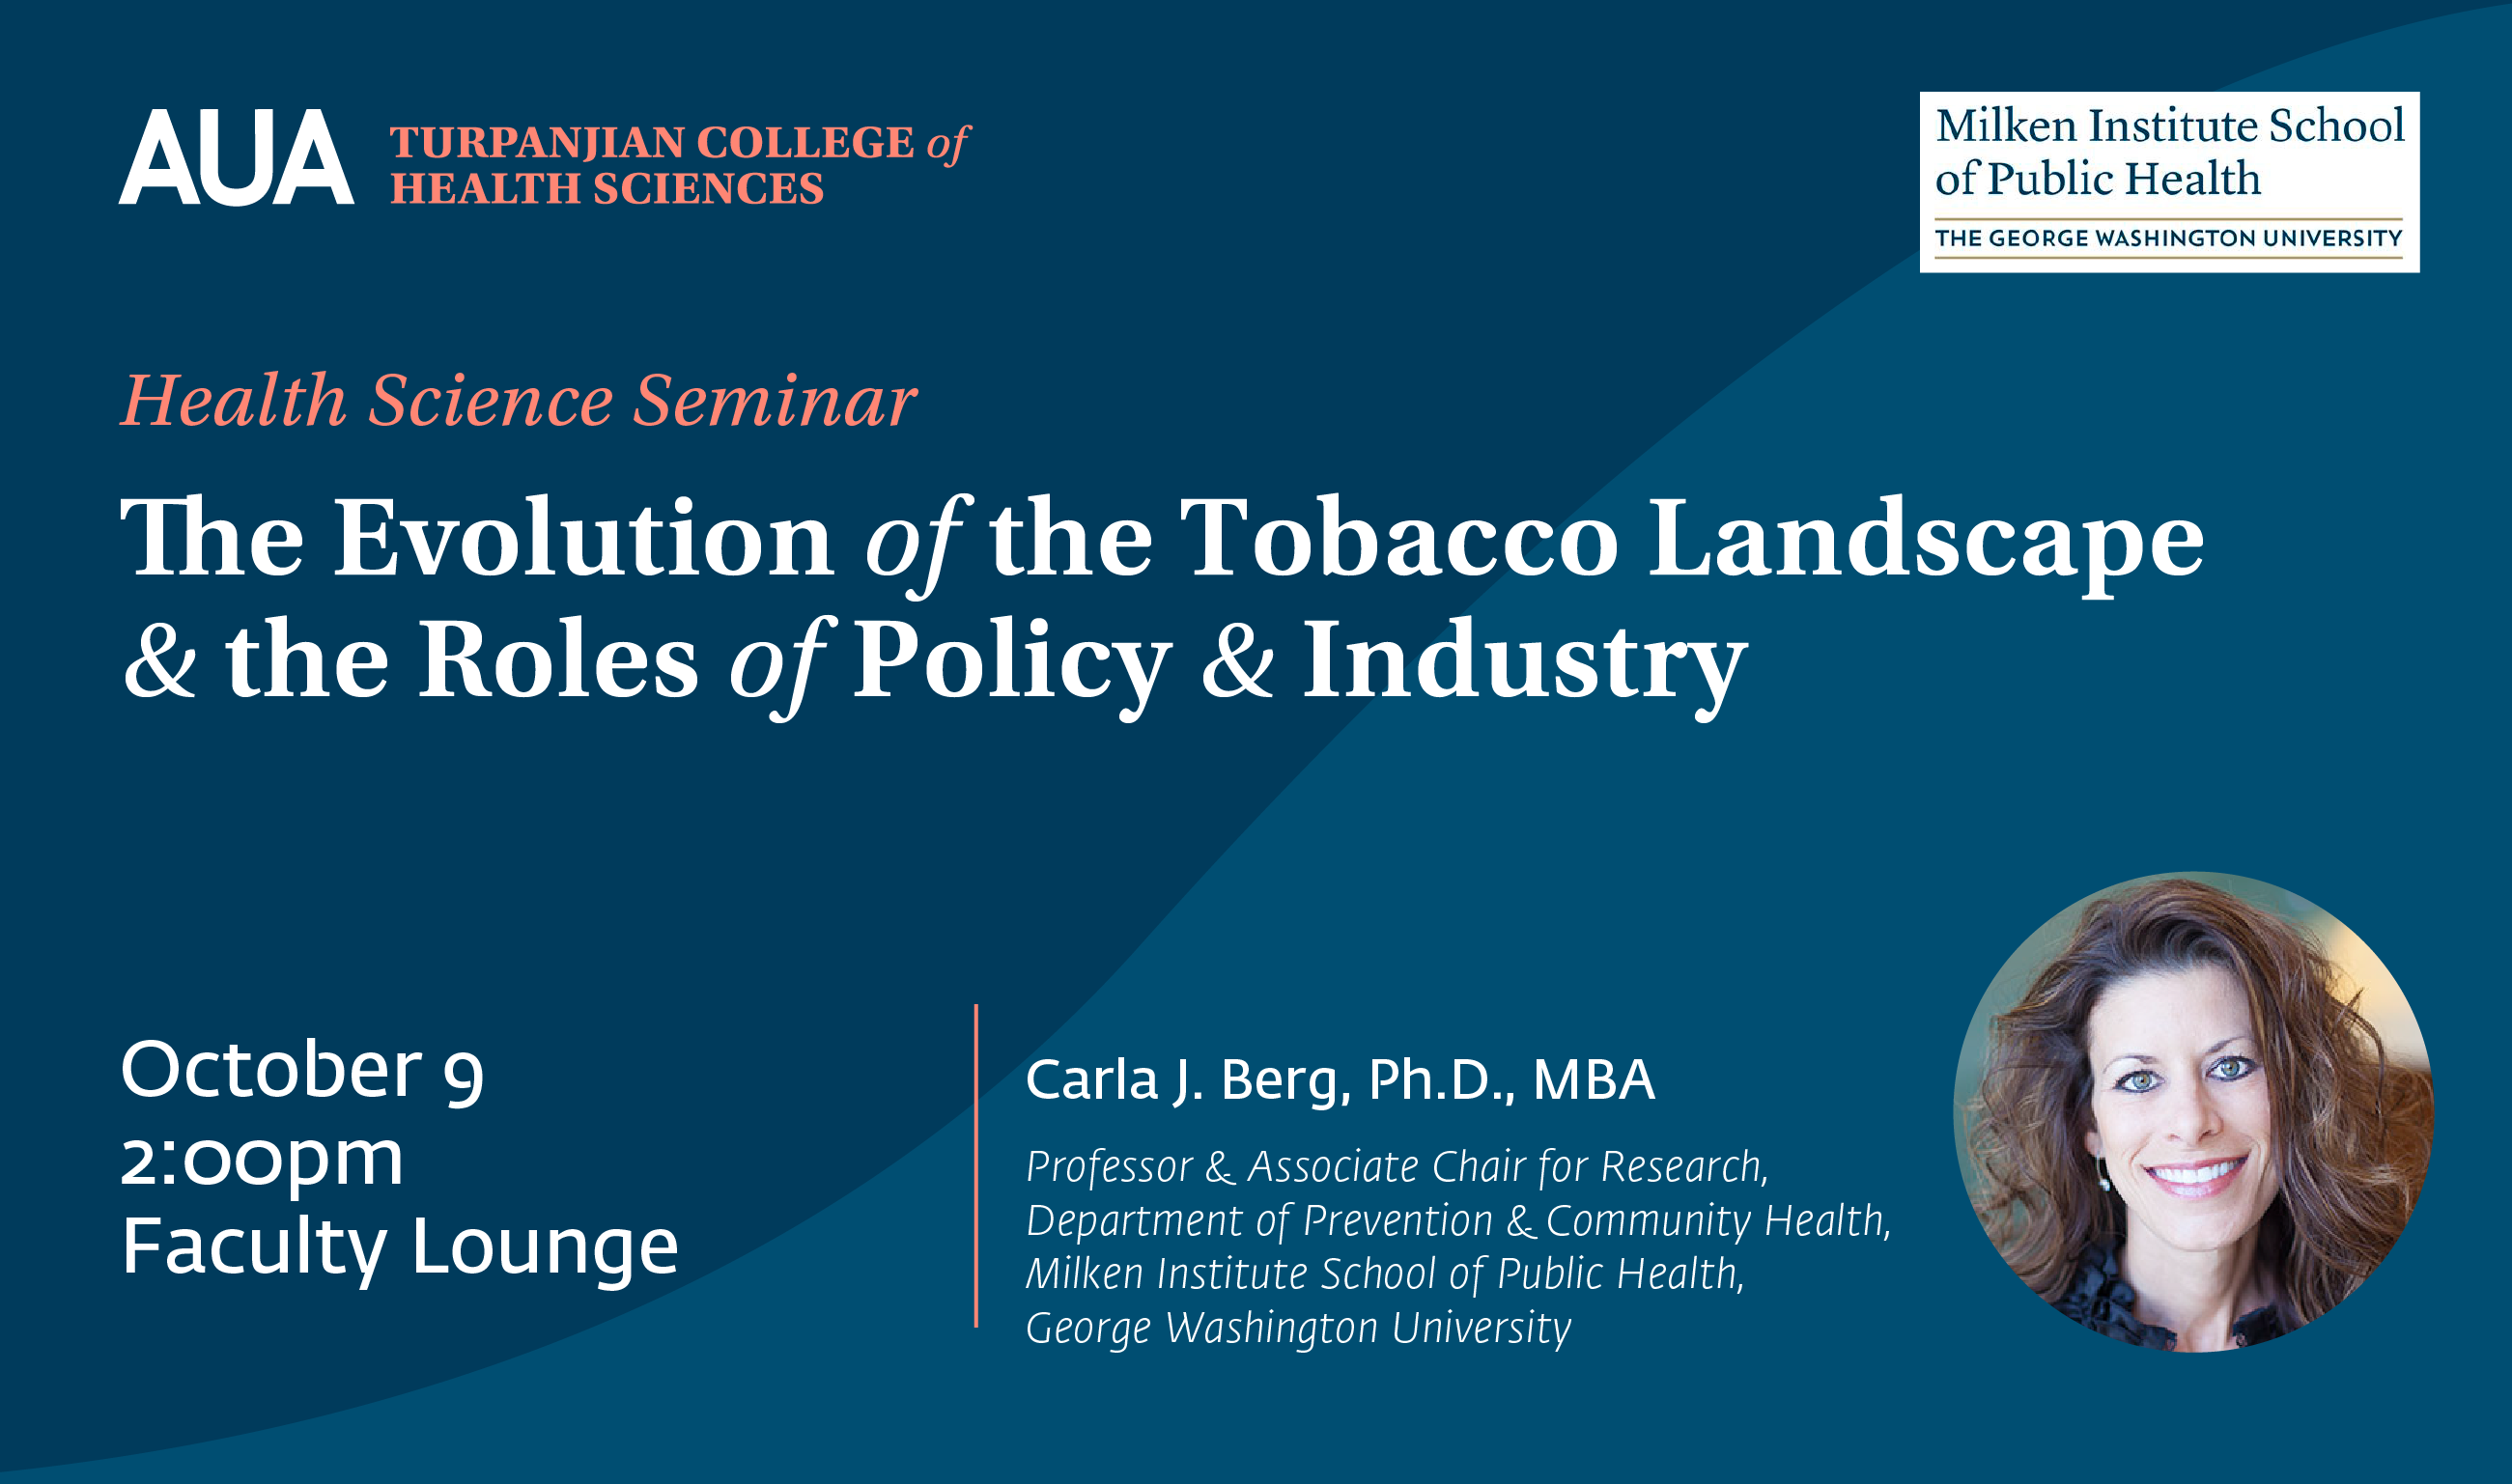 The evolution of the tobacco landscape and the roles of policy and industry American University of Armenia Turpanjian College of Health Sciences